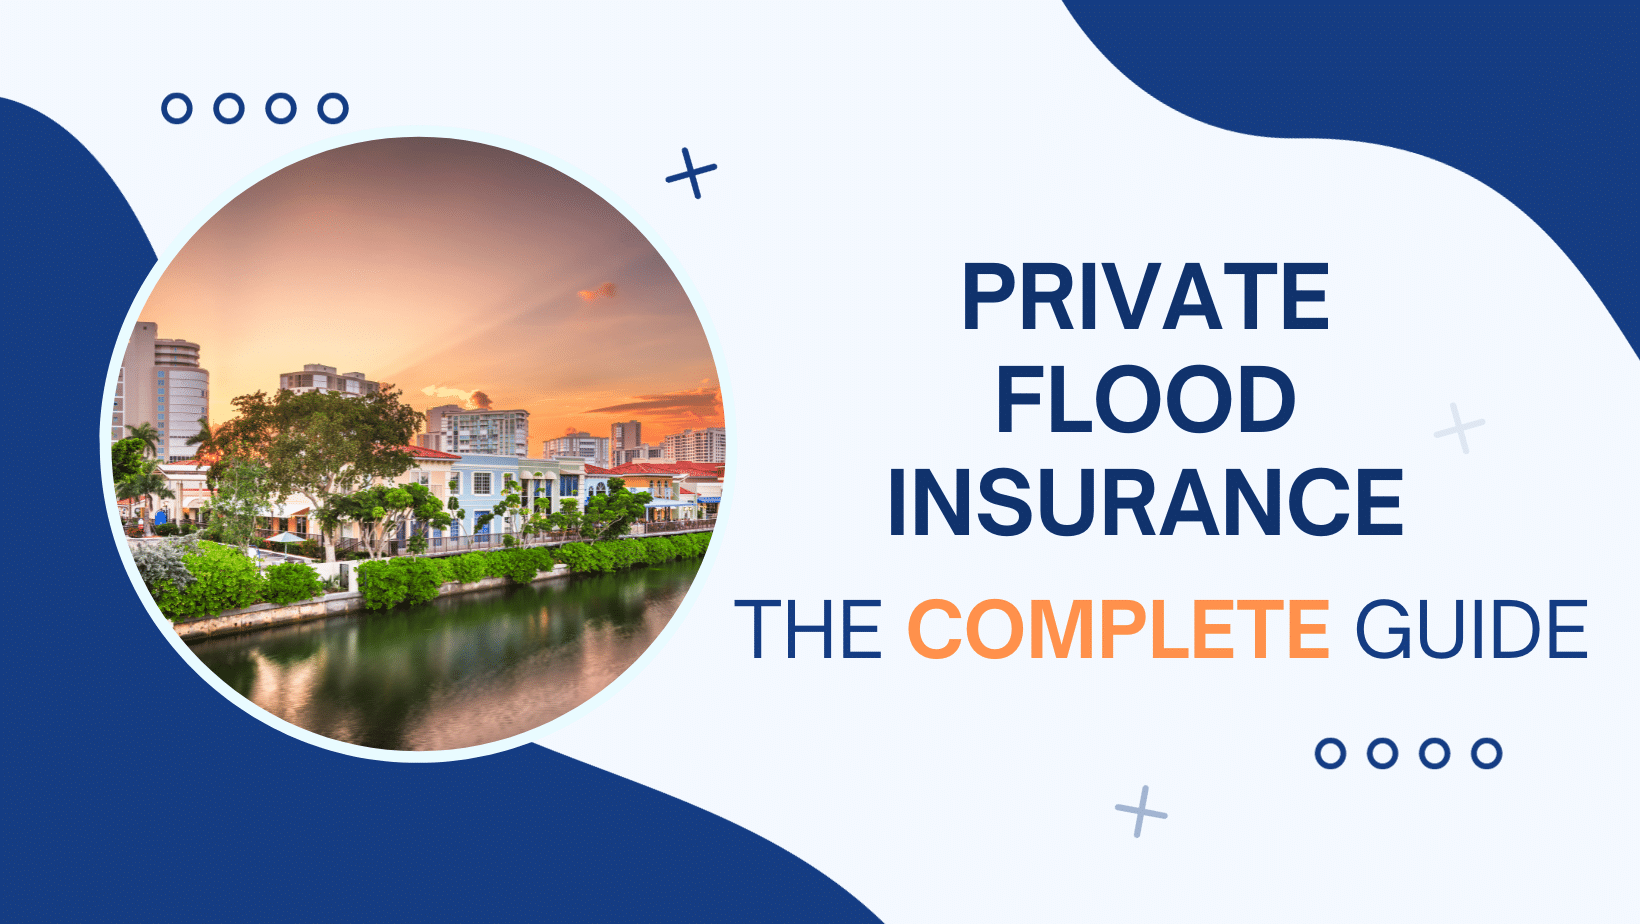 The COMPLETE Guide to Private Flood Insurance 360 1